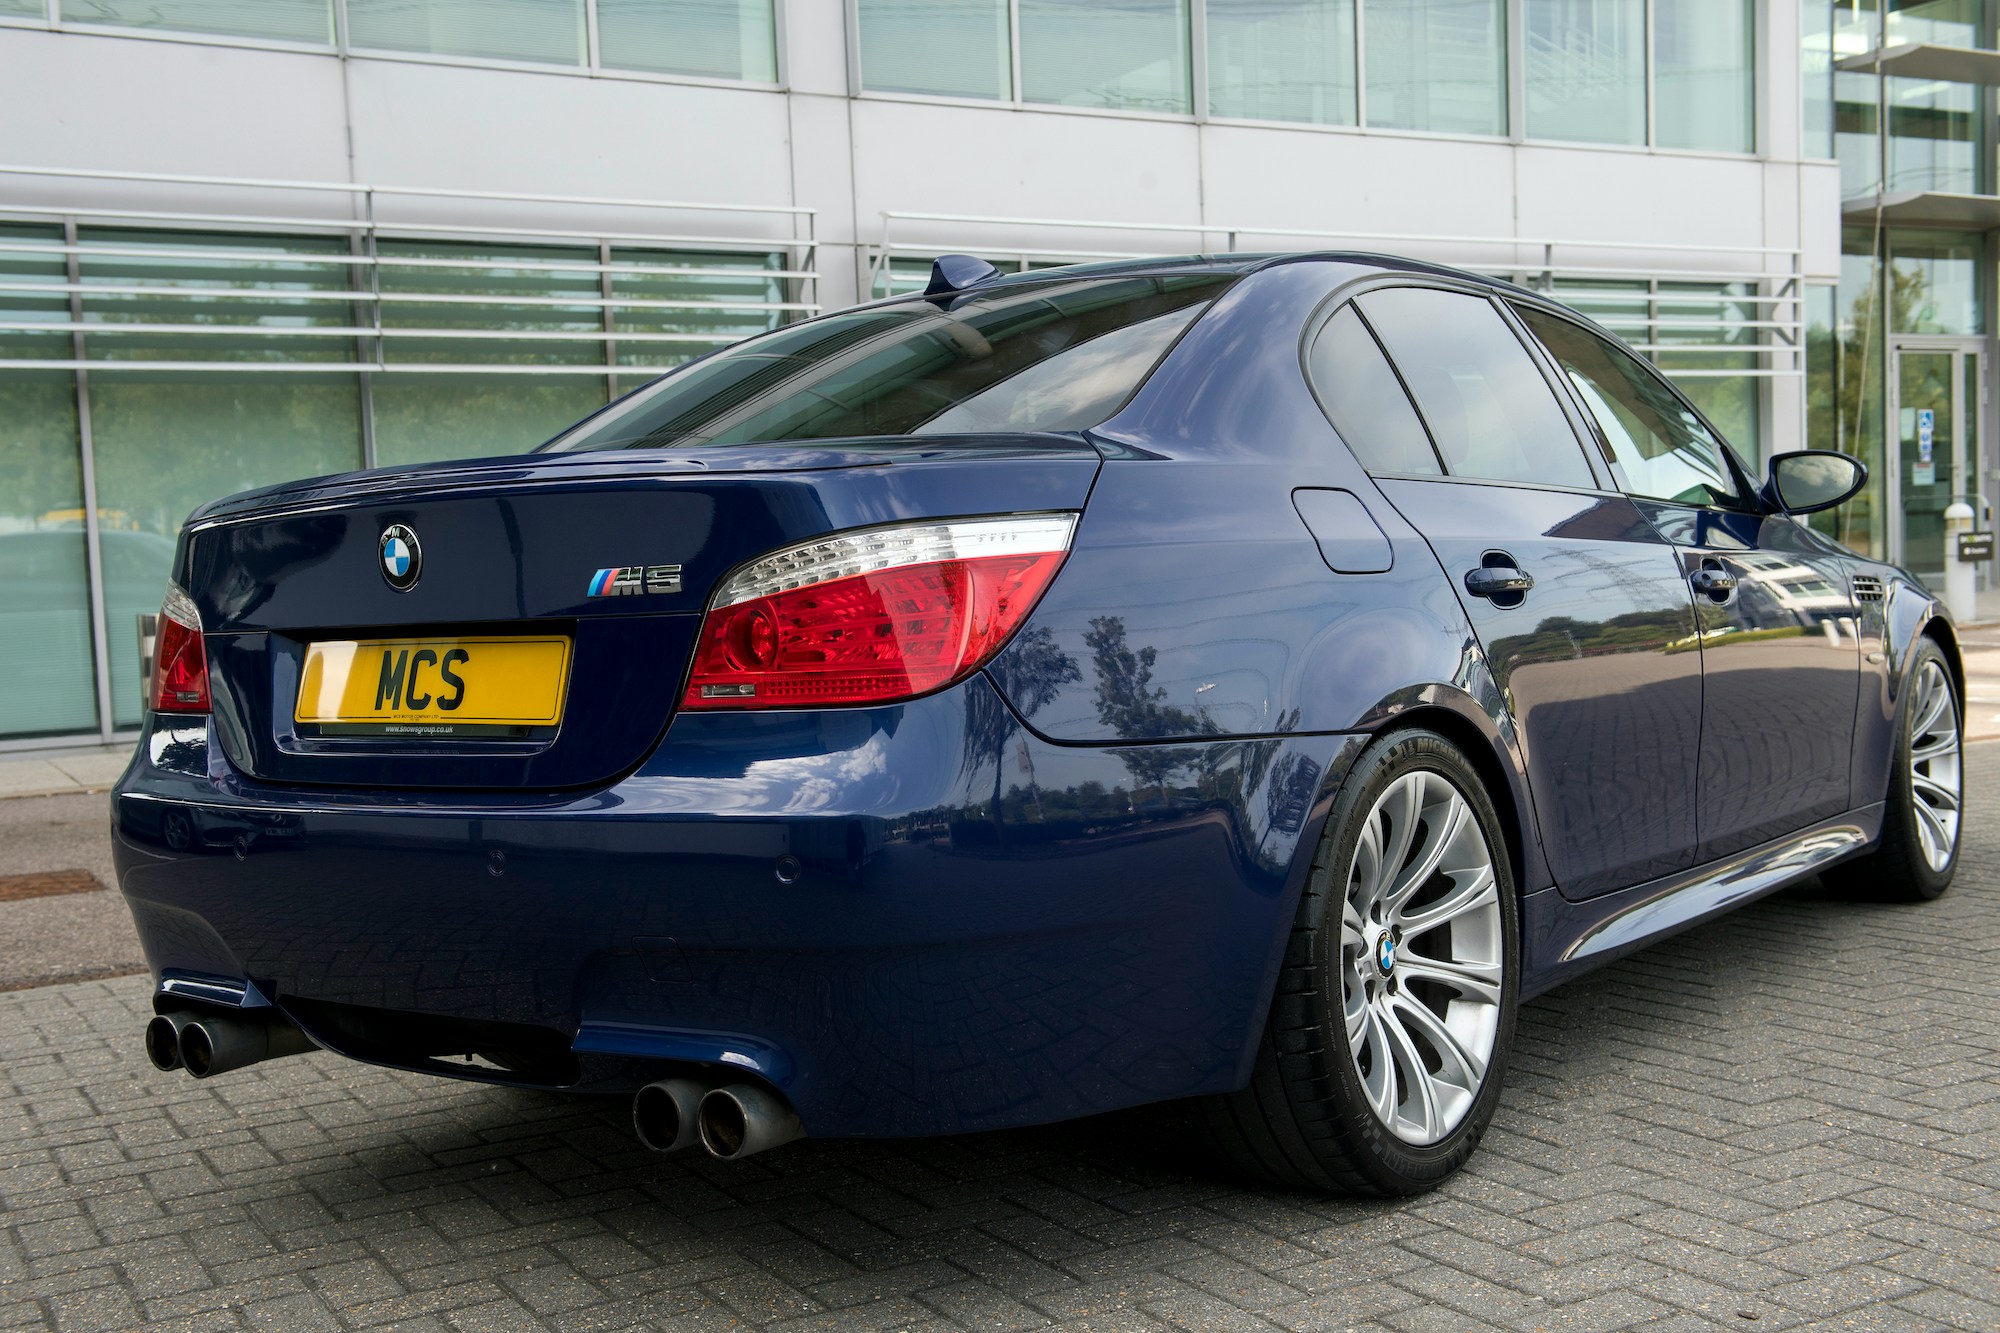 2008 BMW M5 ( E60 ) by Wald #251739 - Best quality free high resolution car  images - mad4wheels